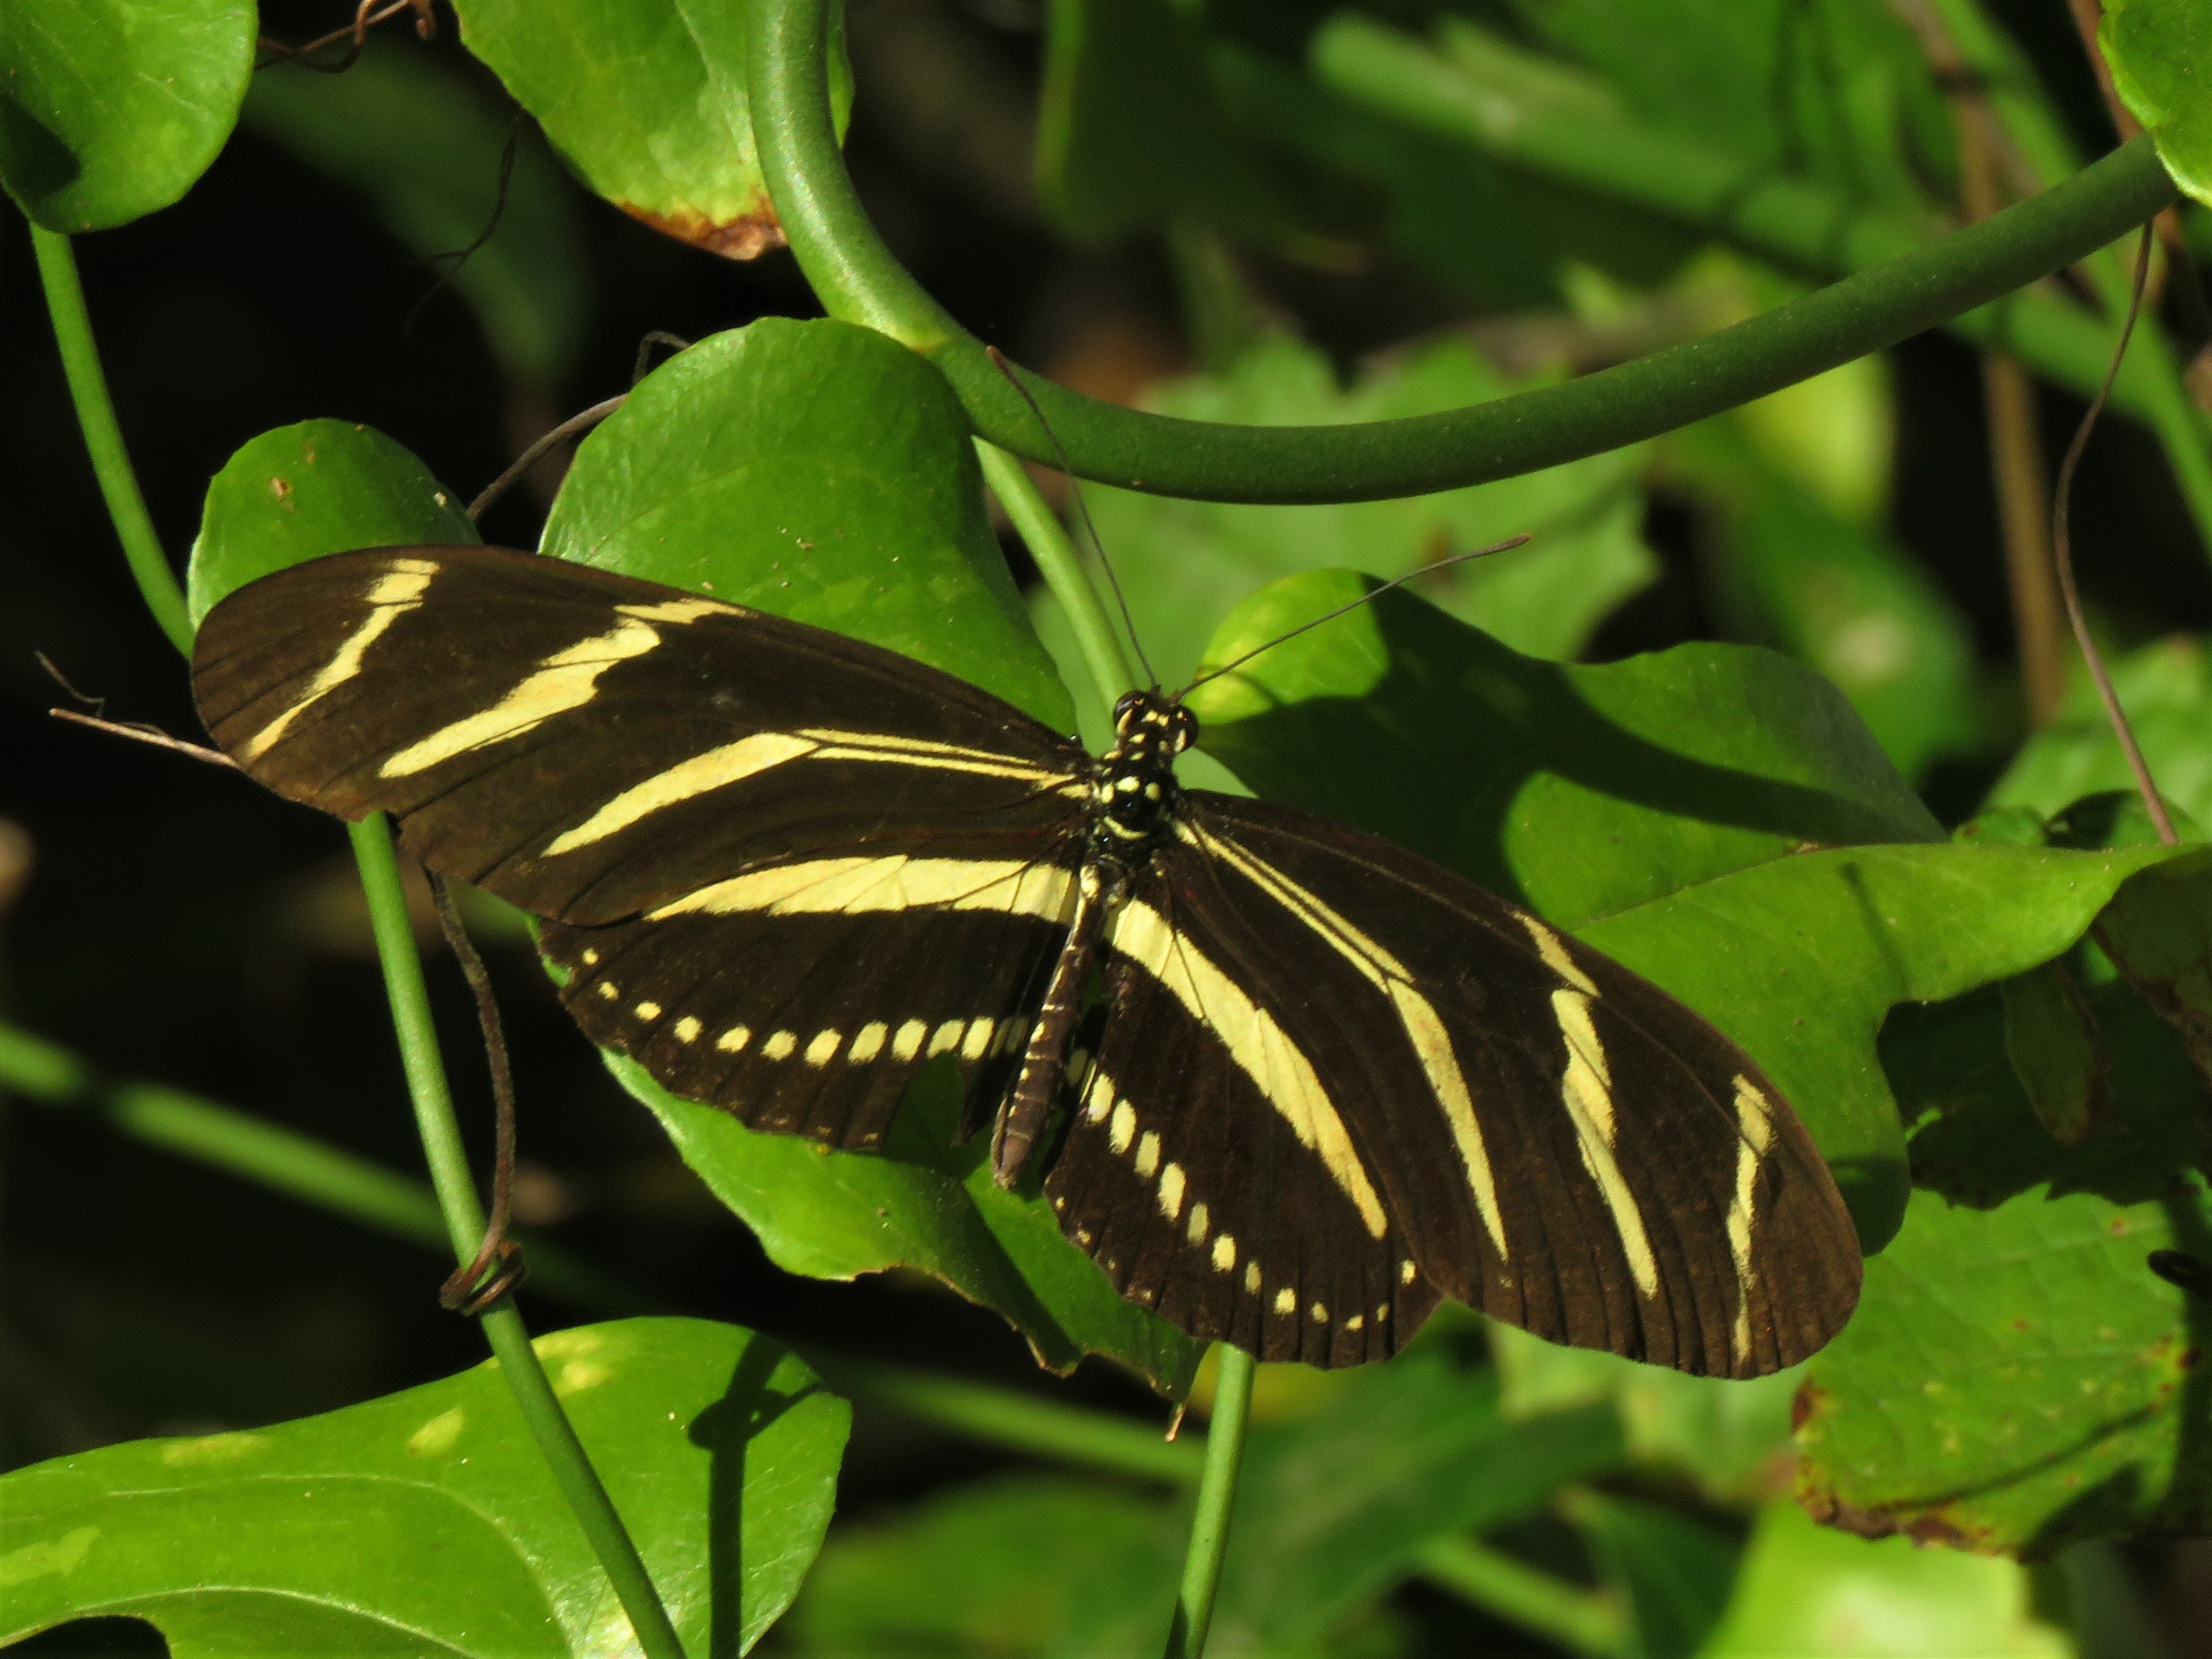 Florida’s state butterfly, Zebra heliconian, at Marjorie Harris Carr Cross Florida Greenway.